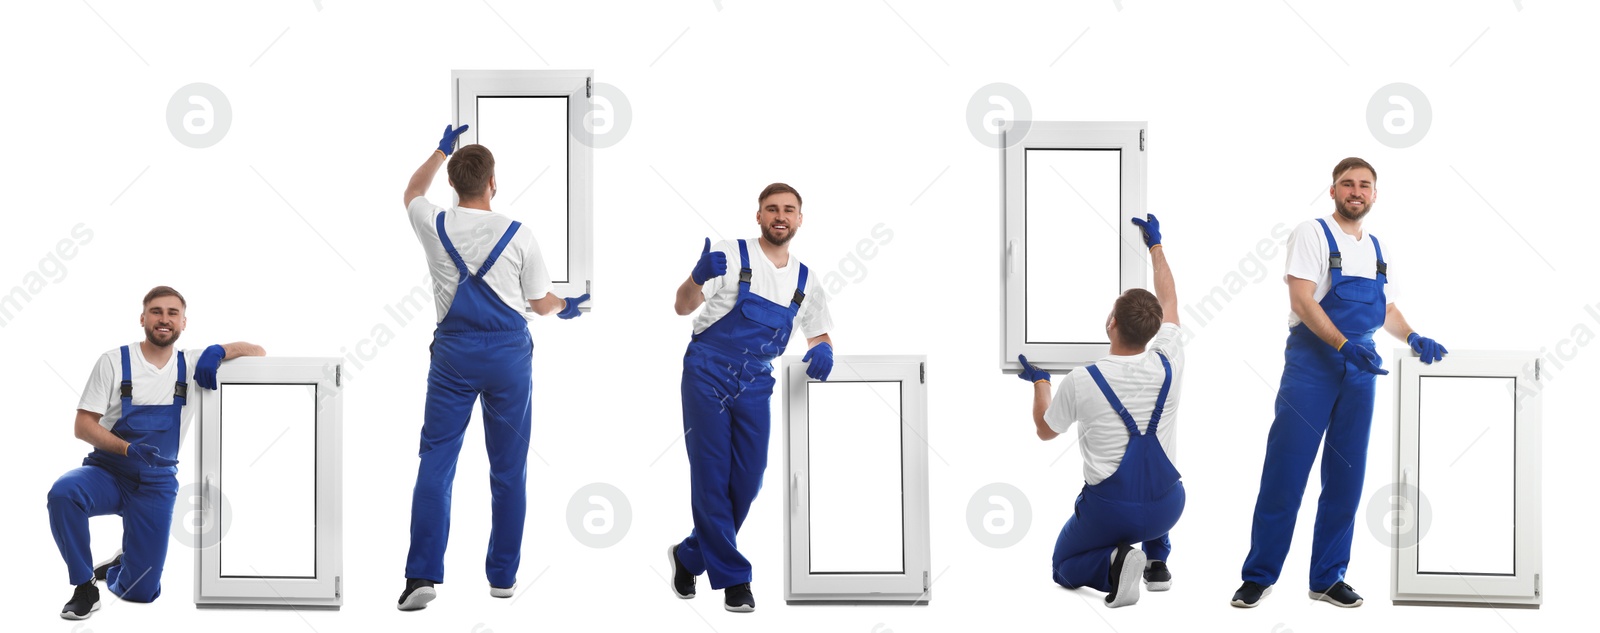 Image of Workers with plastic window on white background, collage. Installation service